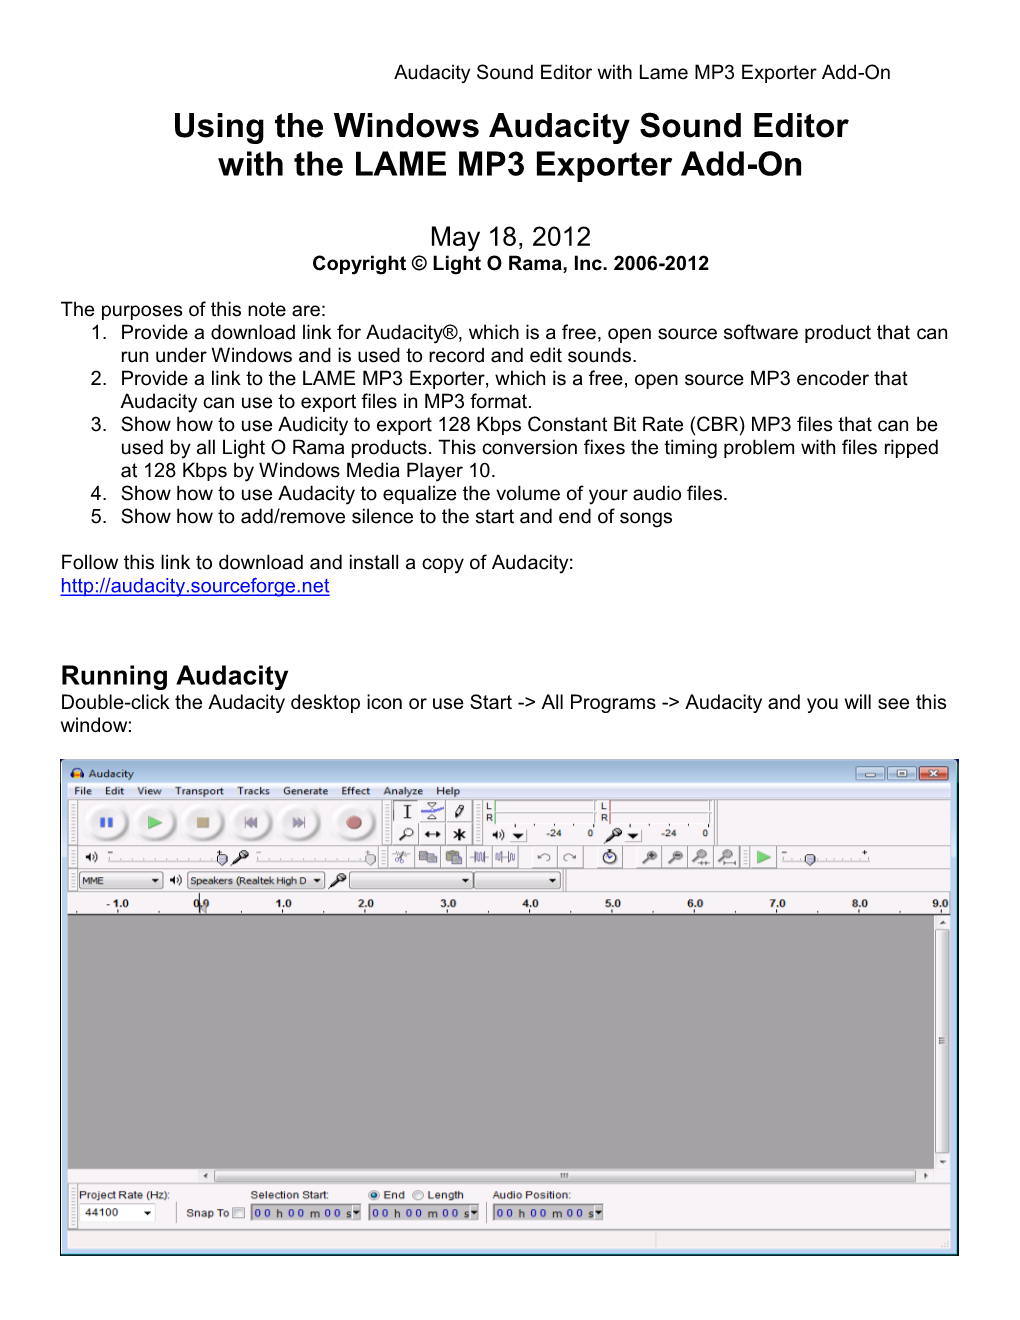 Using the Windows Audacity Sound Editor with the LAME MP3 Exporter Add-On